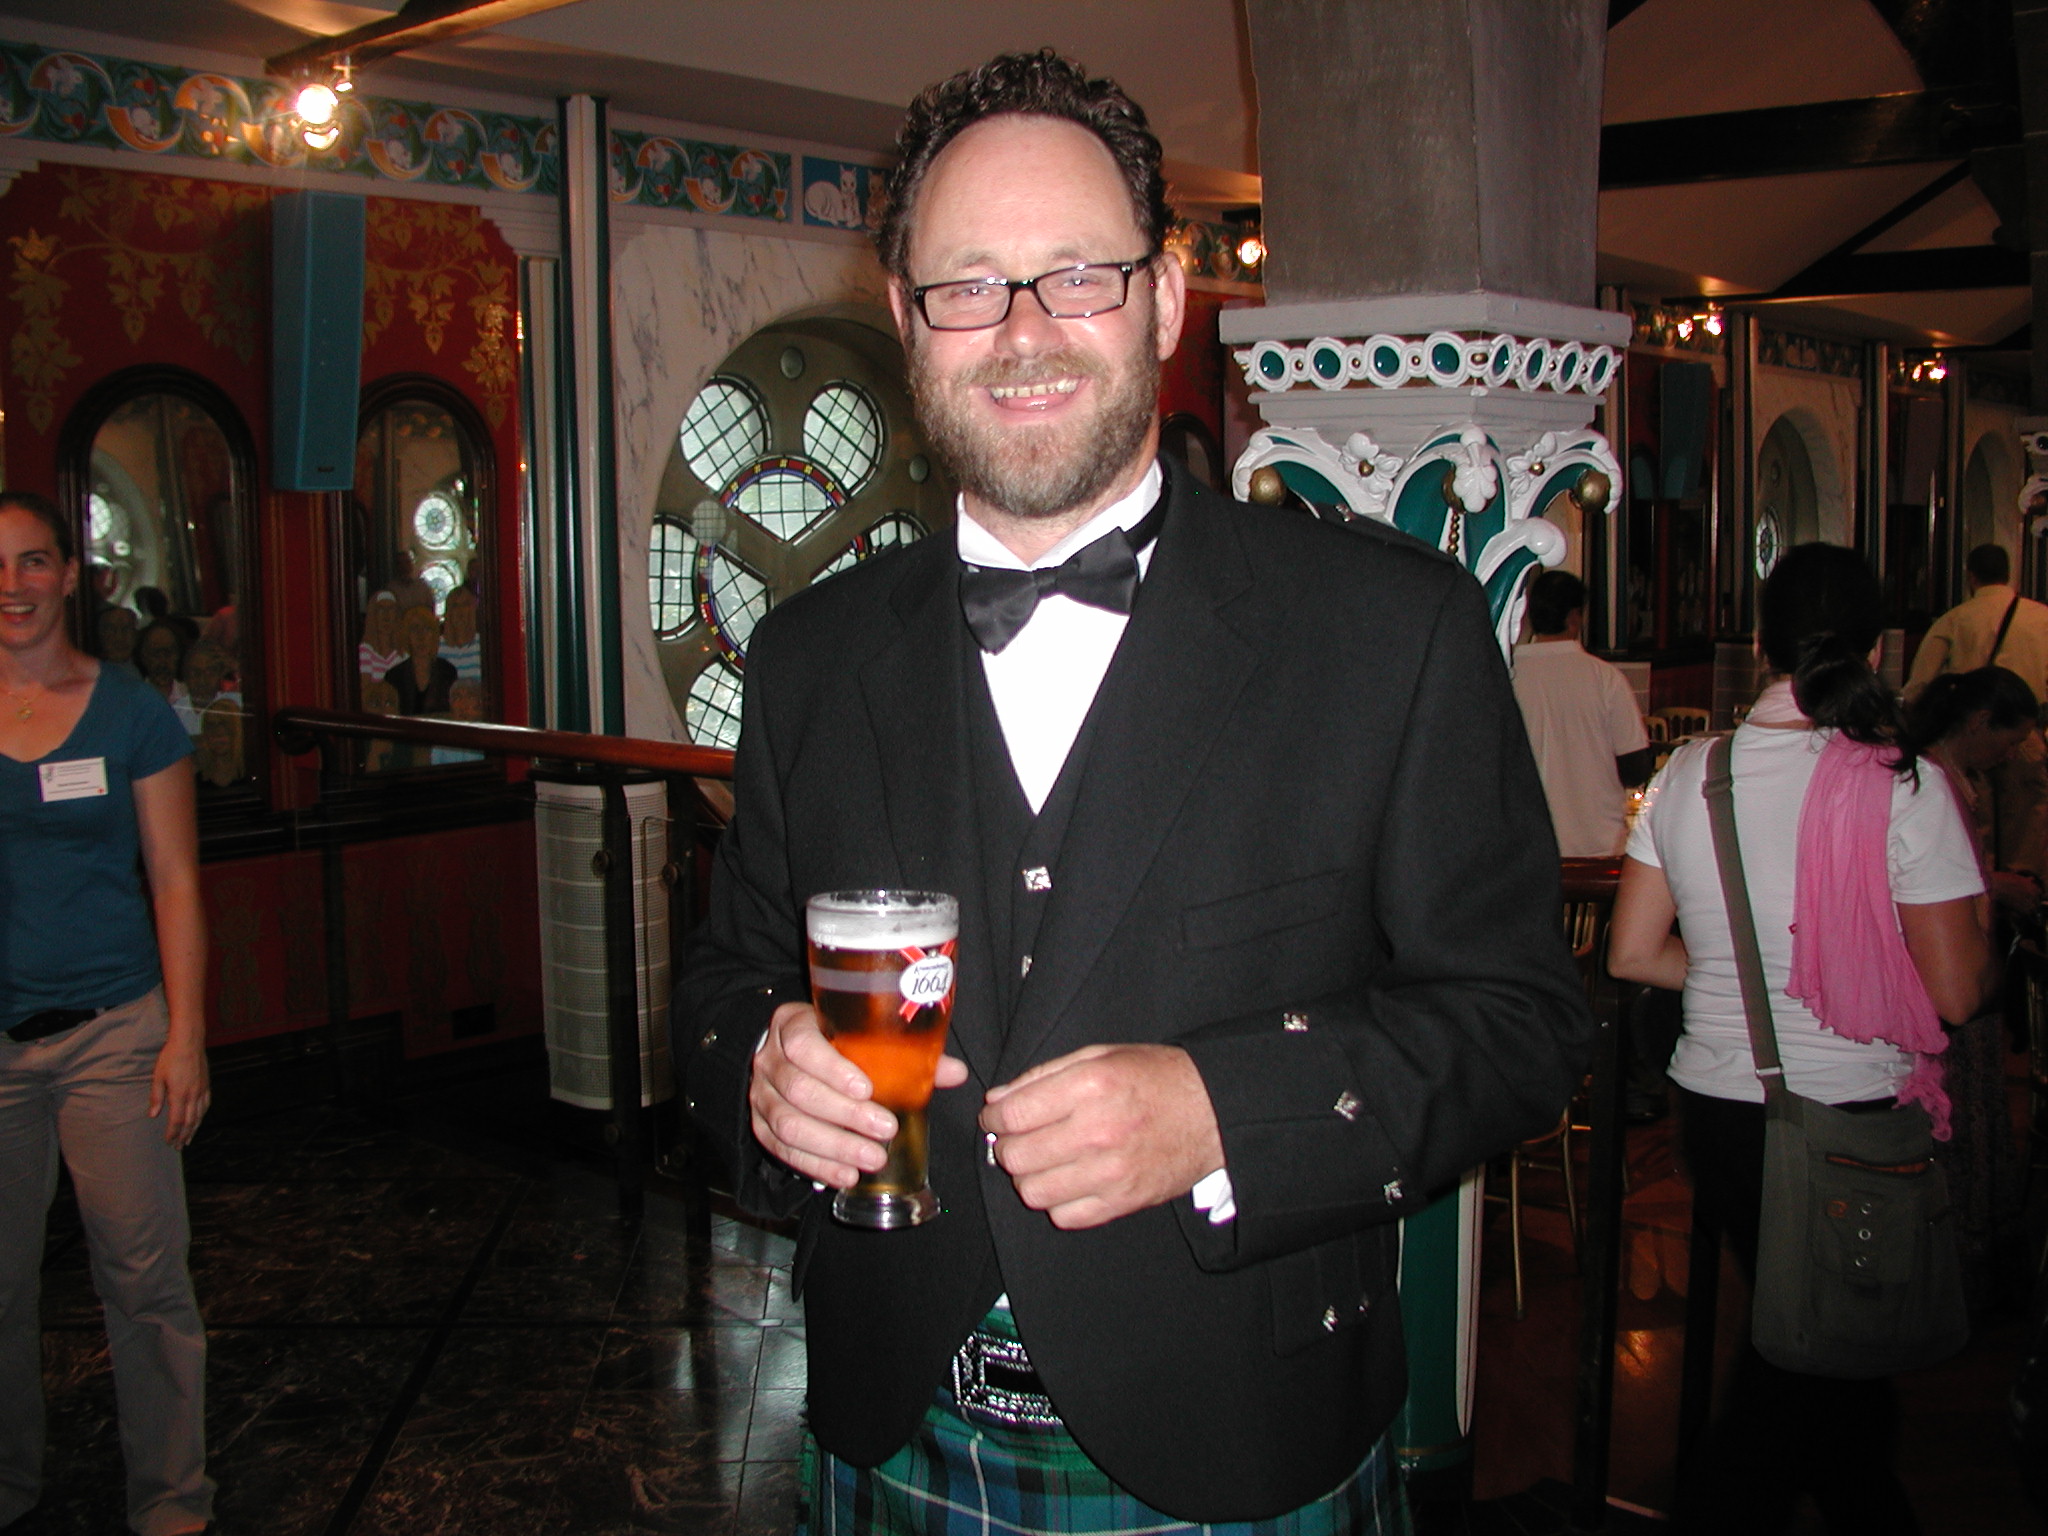 Formal dinner at the FTD 12 meeting in Glasgow in 2010. Image: Michael Simon Krochmal.